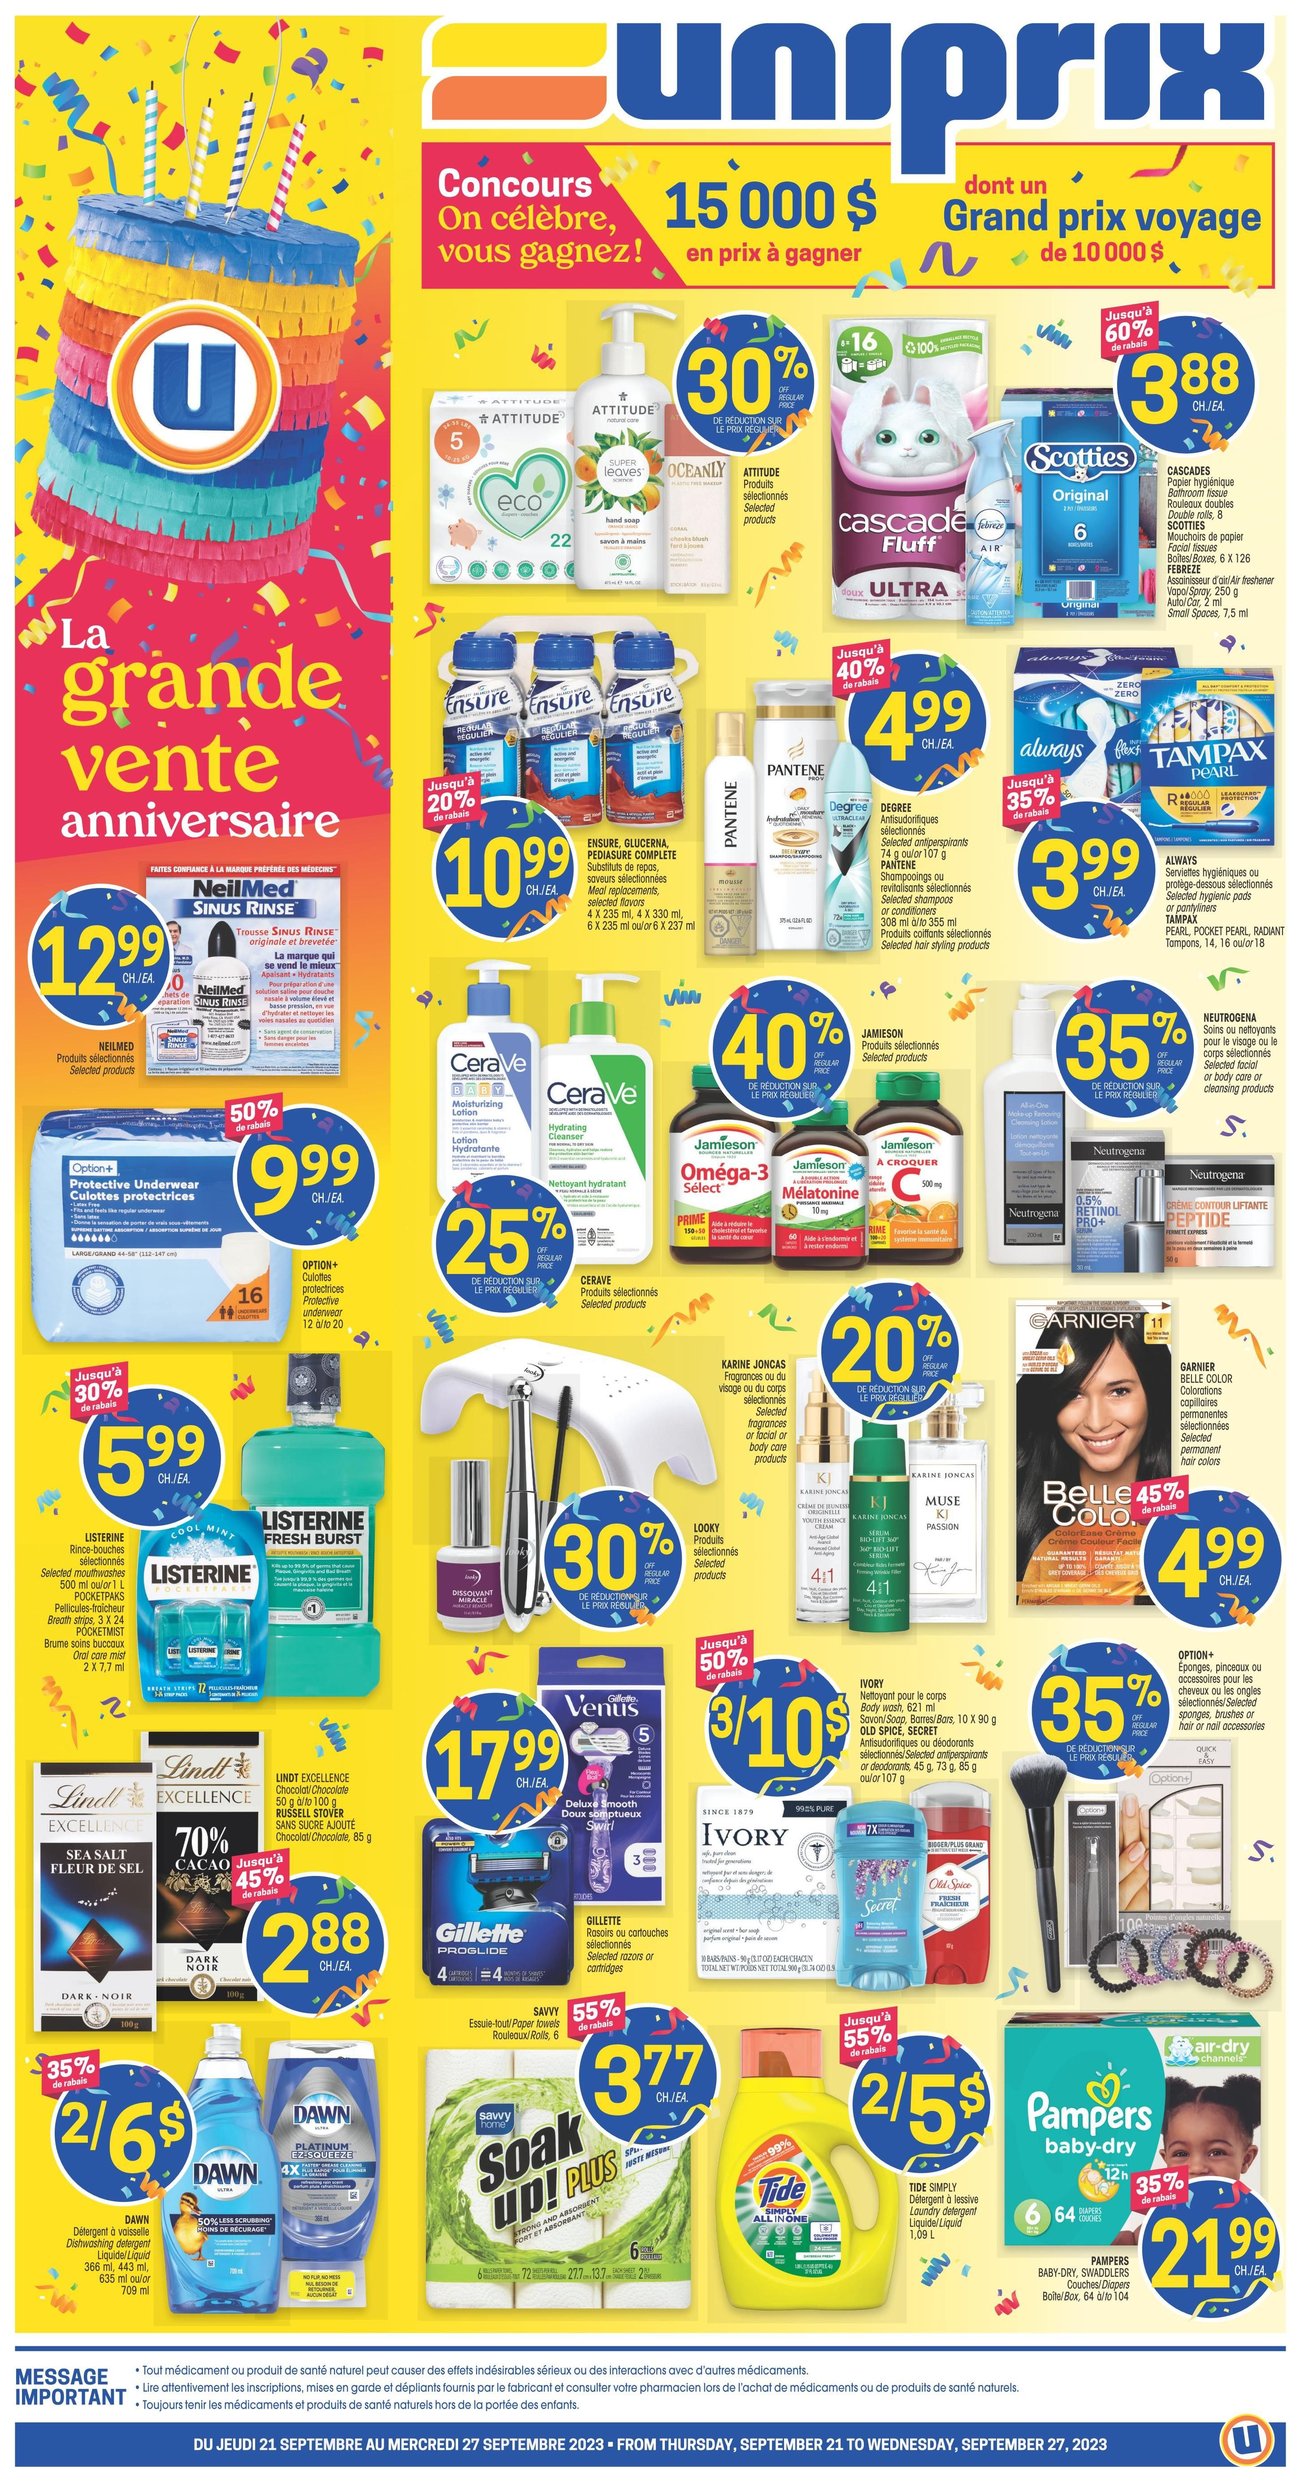 Uniprix - Weekly Flyer Specials - Page 1